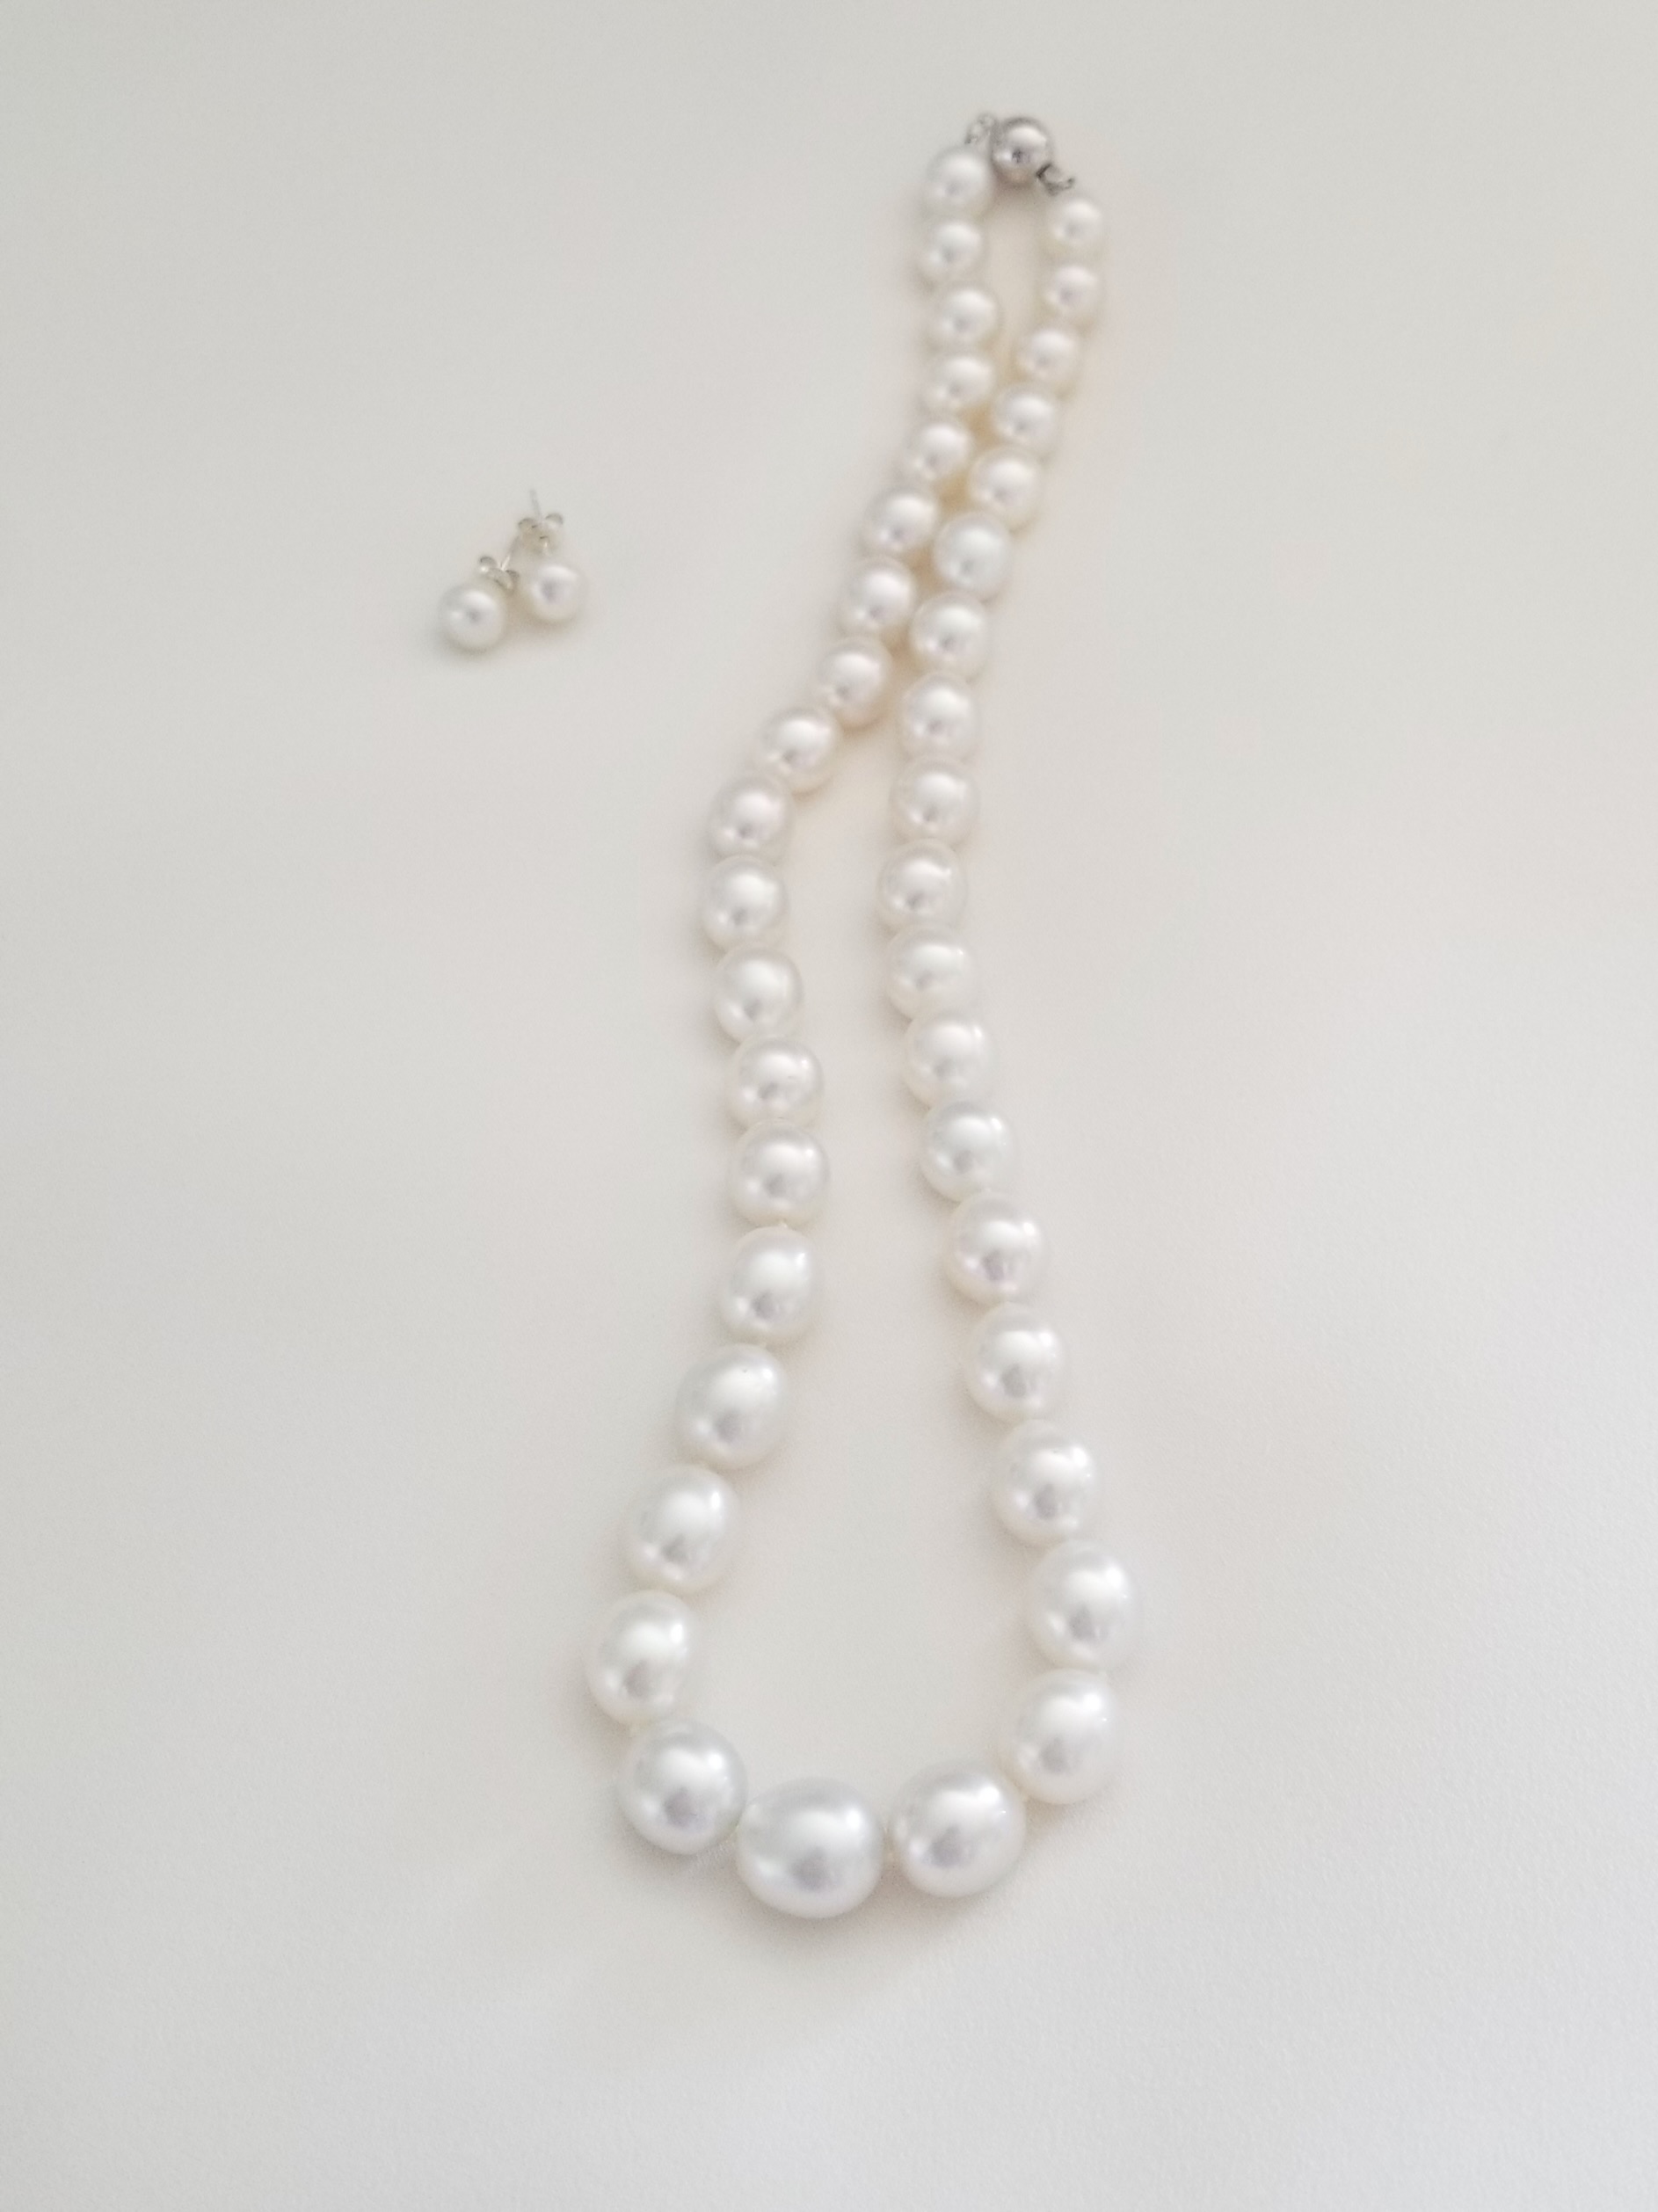 What South Sea pearls